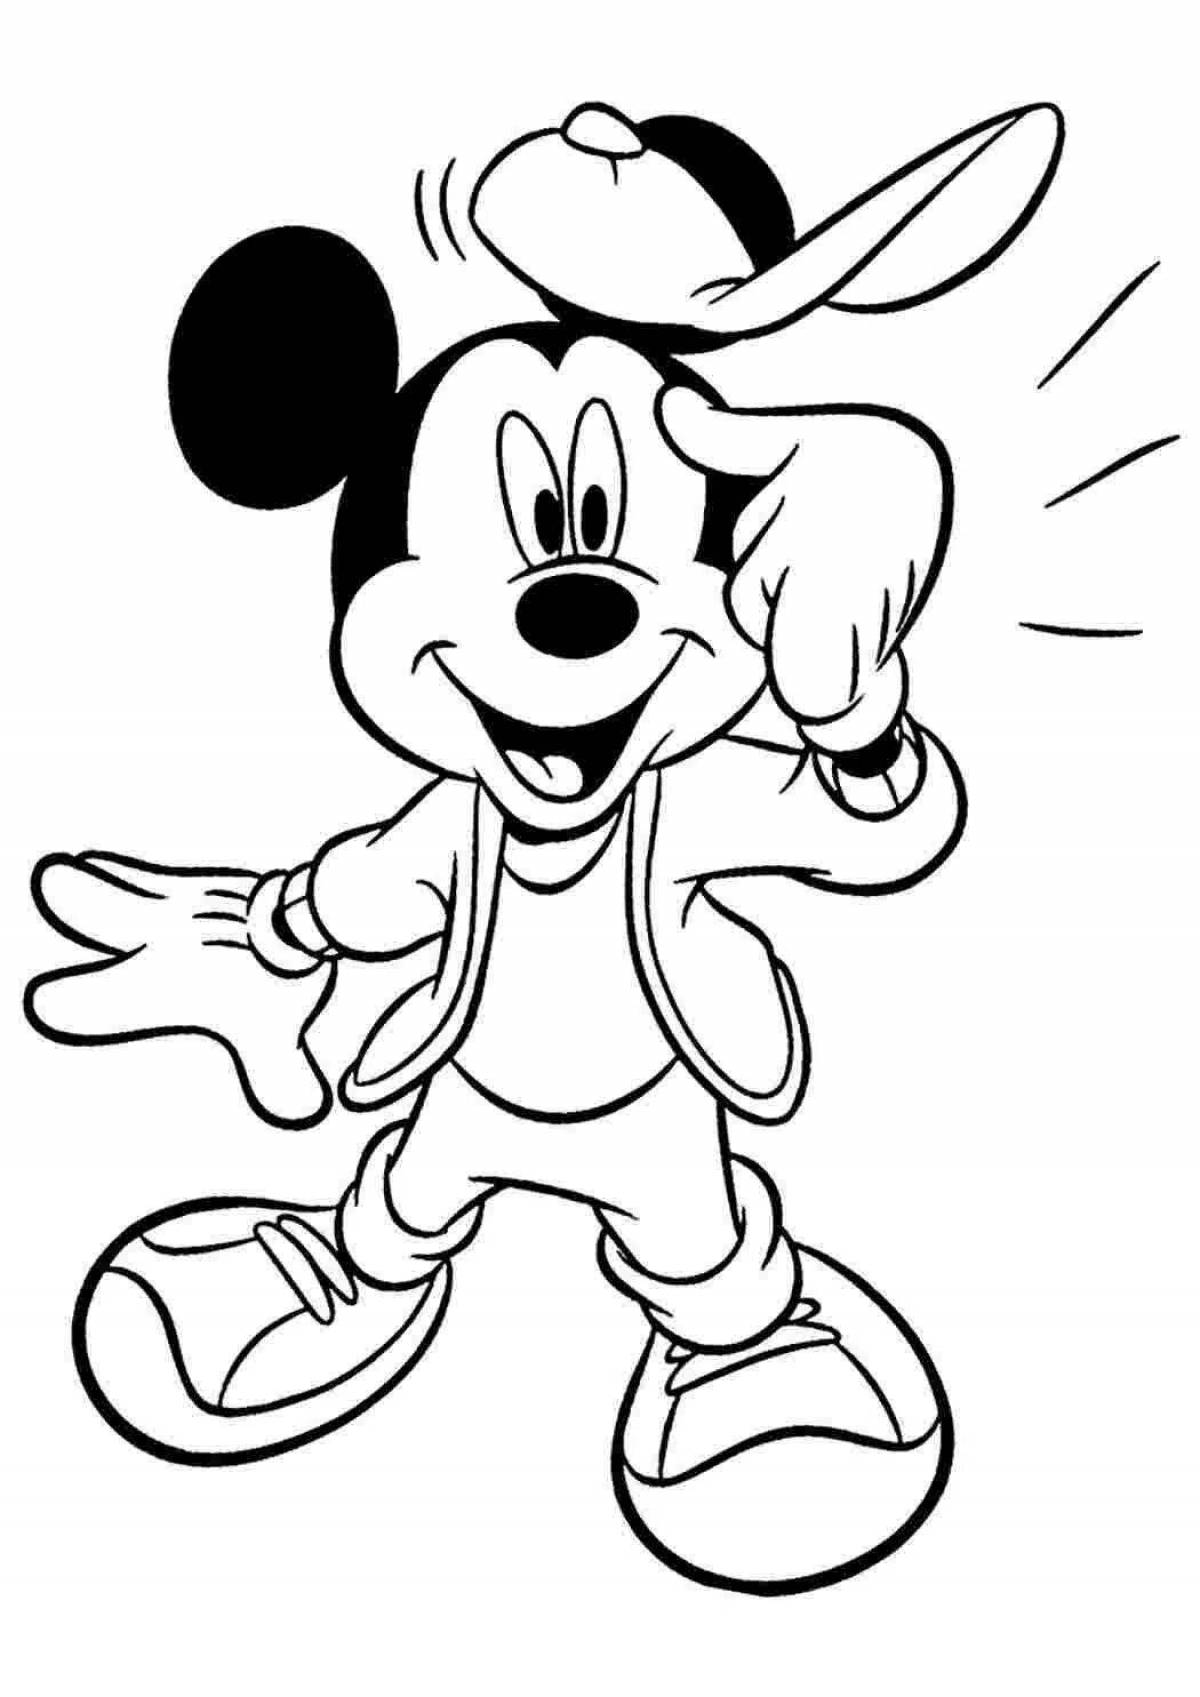 Attractive mickey mouse coloring book for boys